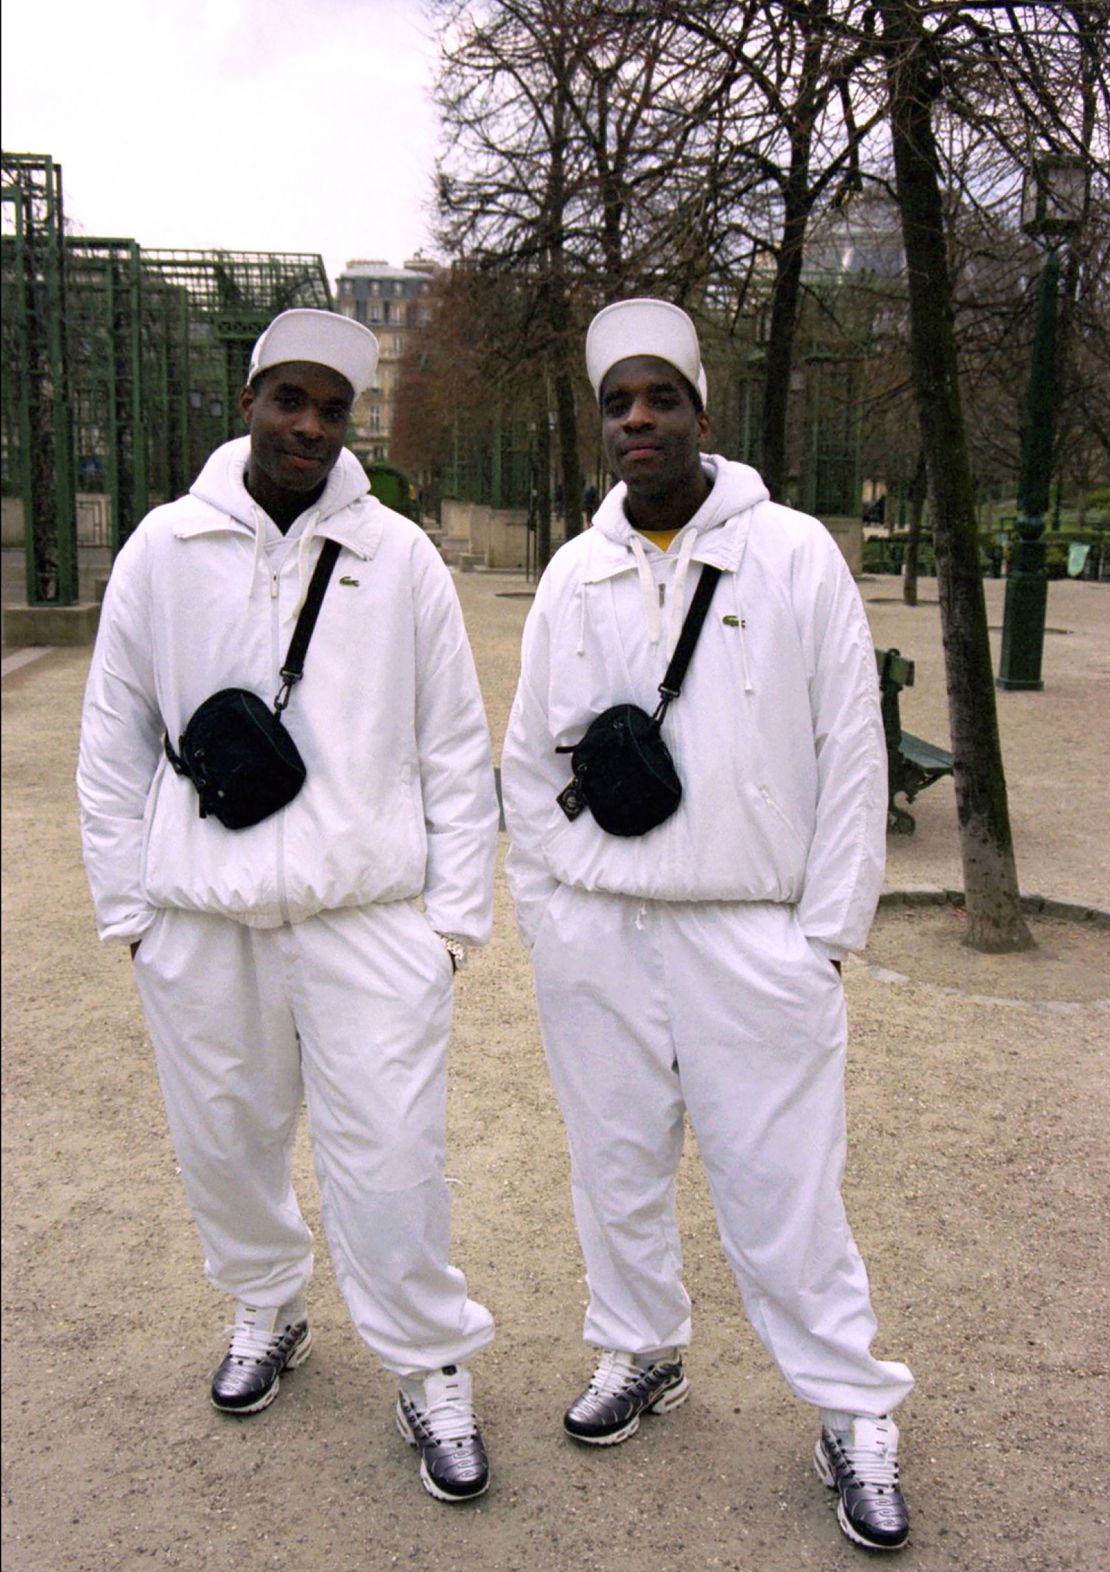 A portrait of twins from the series "Nous Somes 'Halles.'"